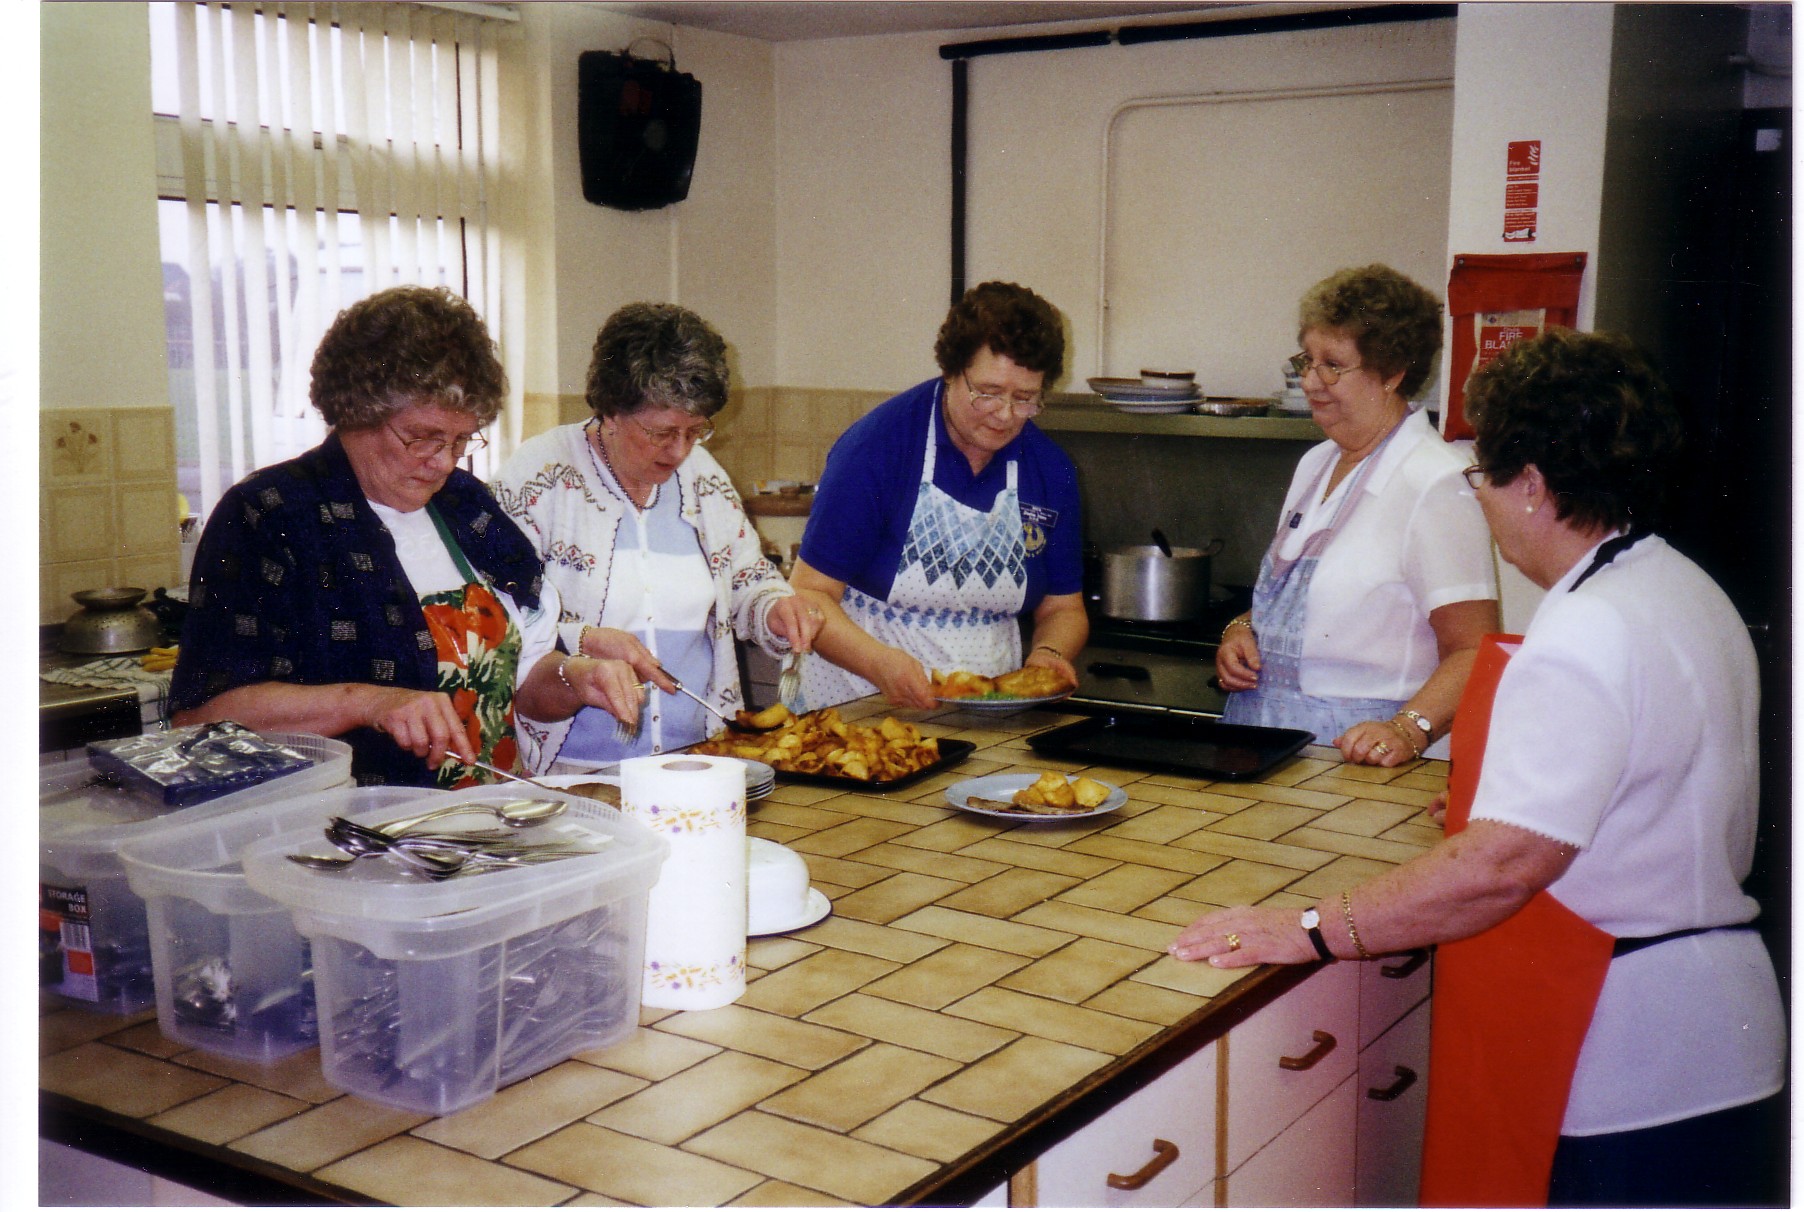 Margaret (left) and Pauline (centre) preparing food for members of RAF Central Band